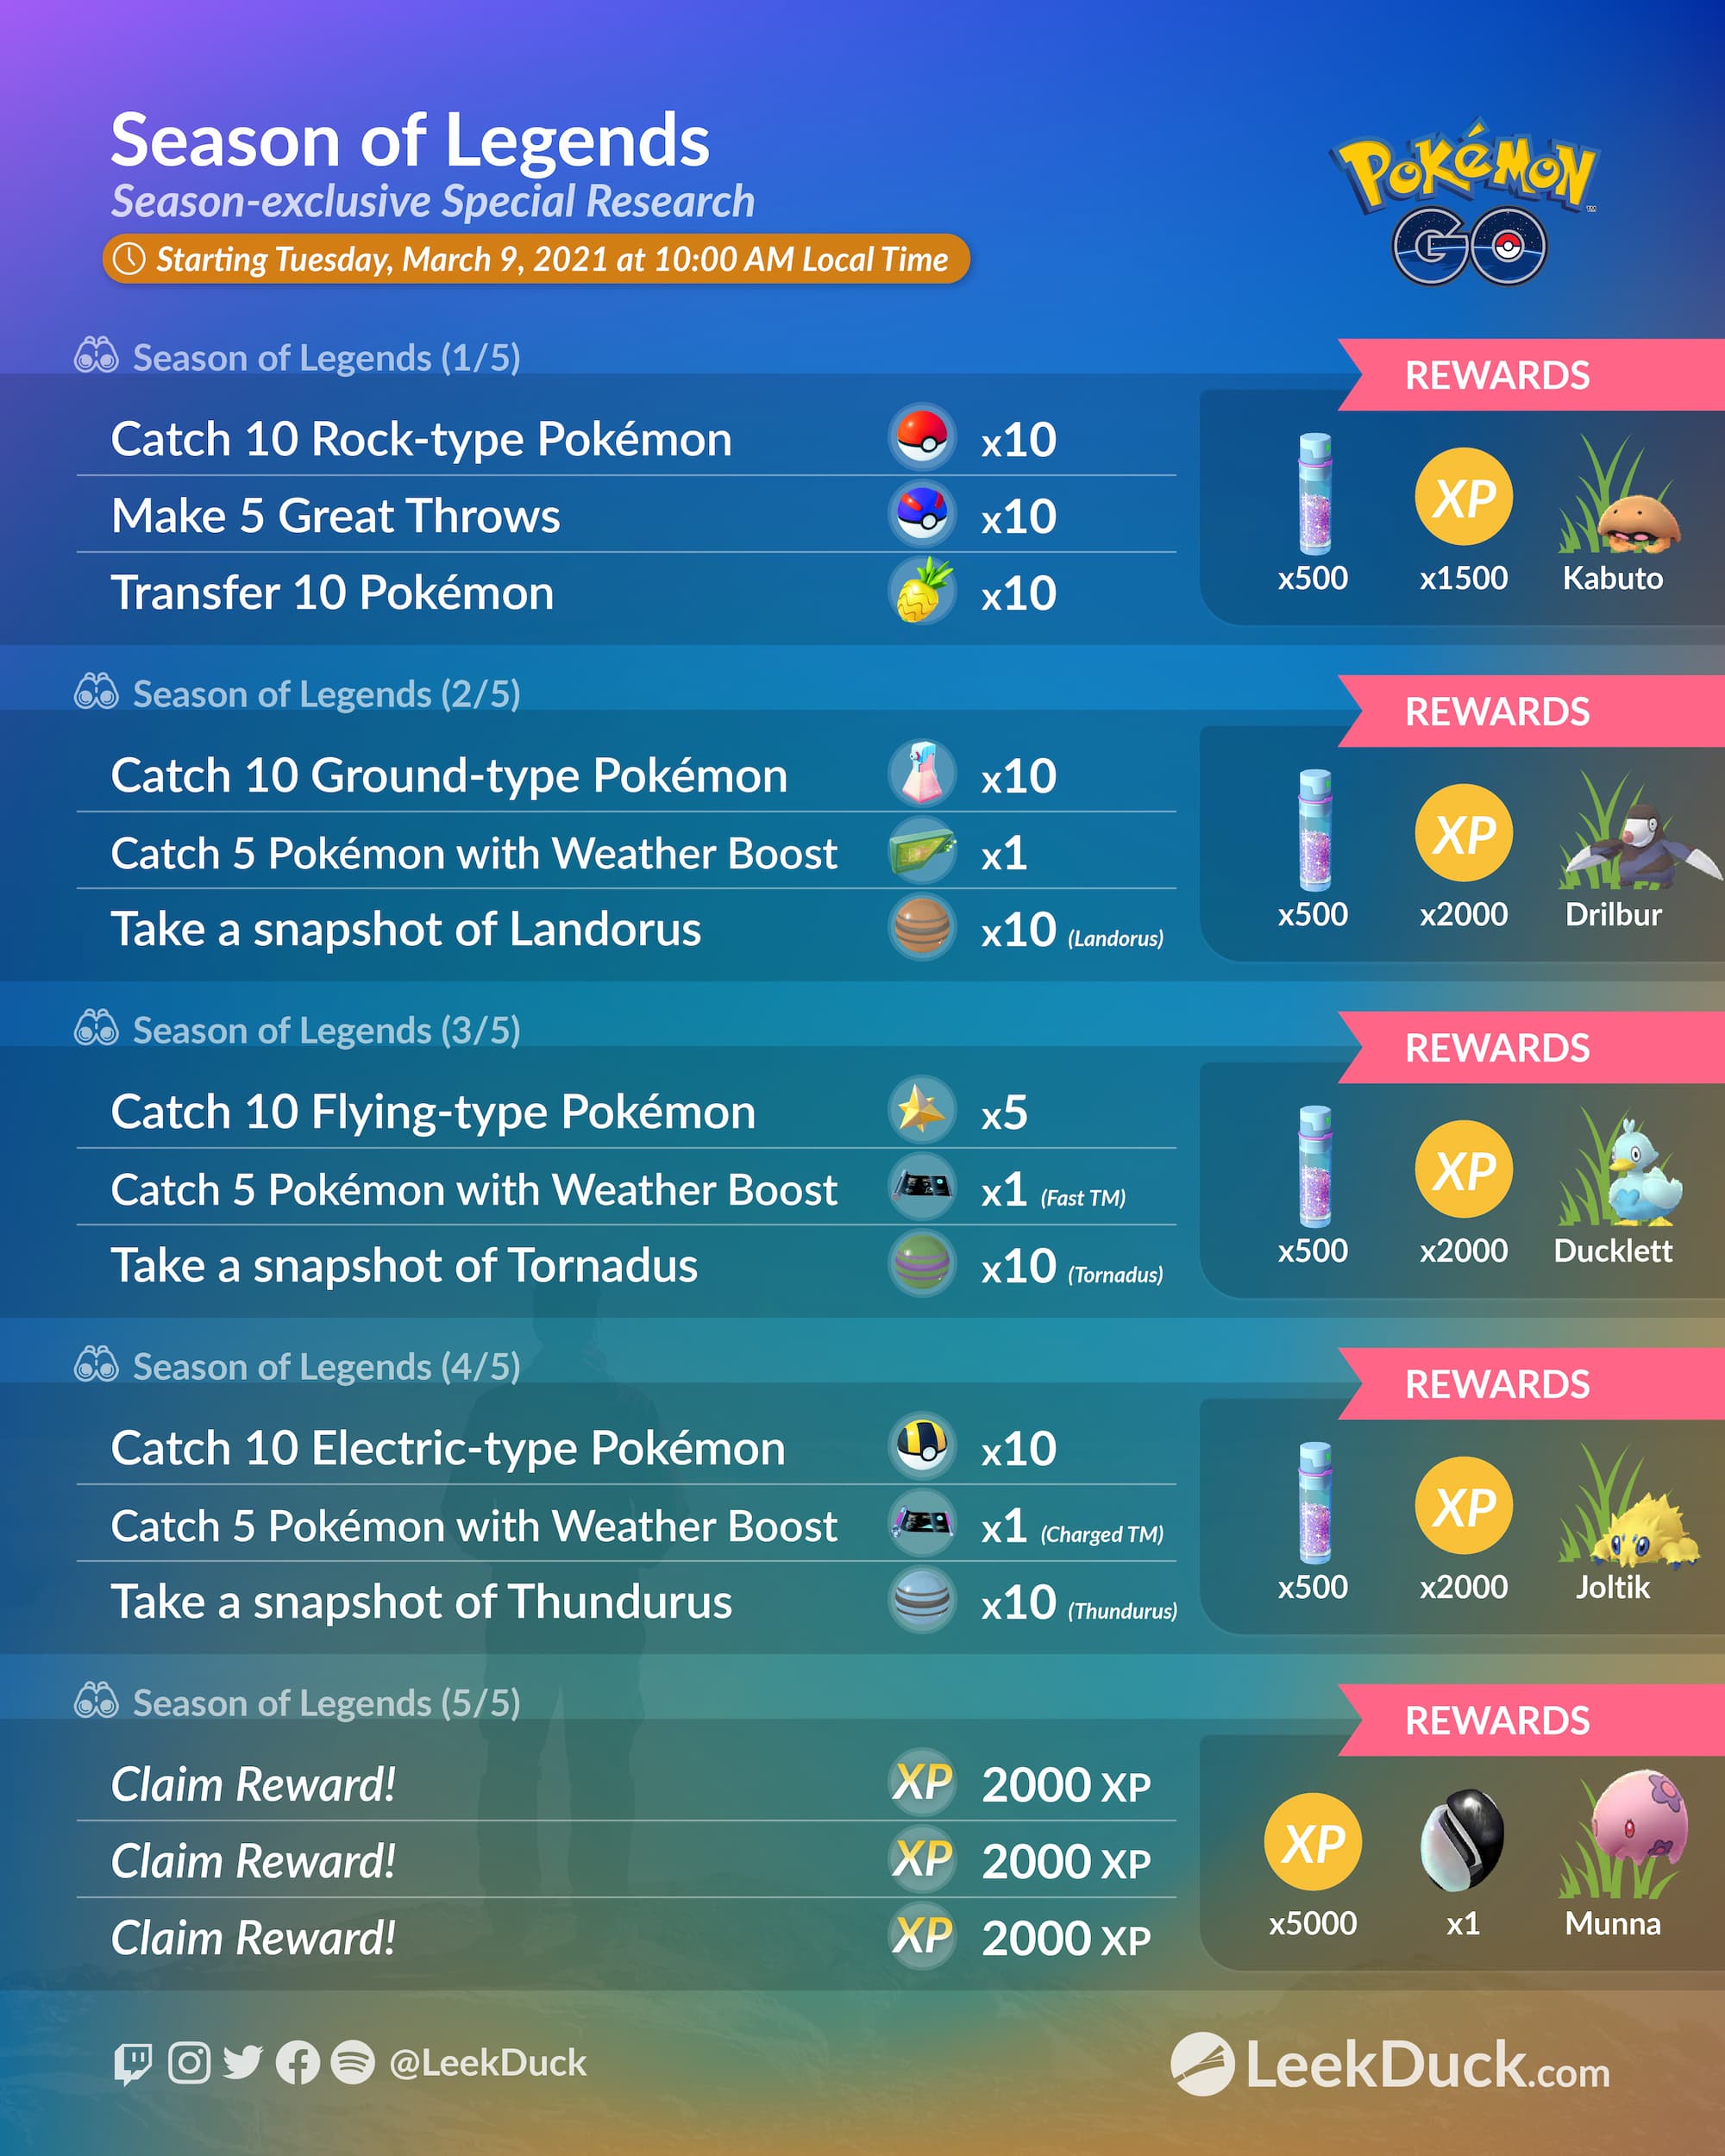 Pokémon Go' Search for Legends Event: Start Time, Research Tasks